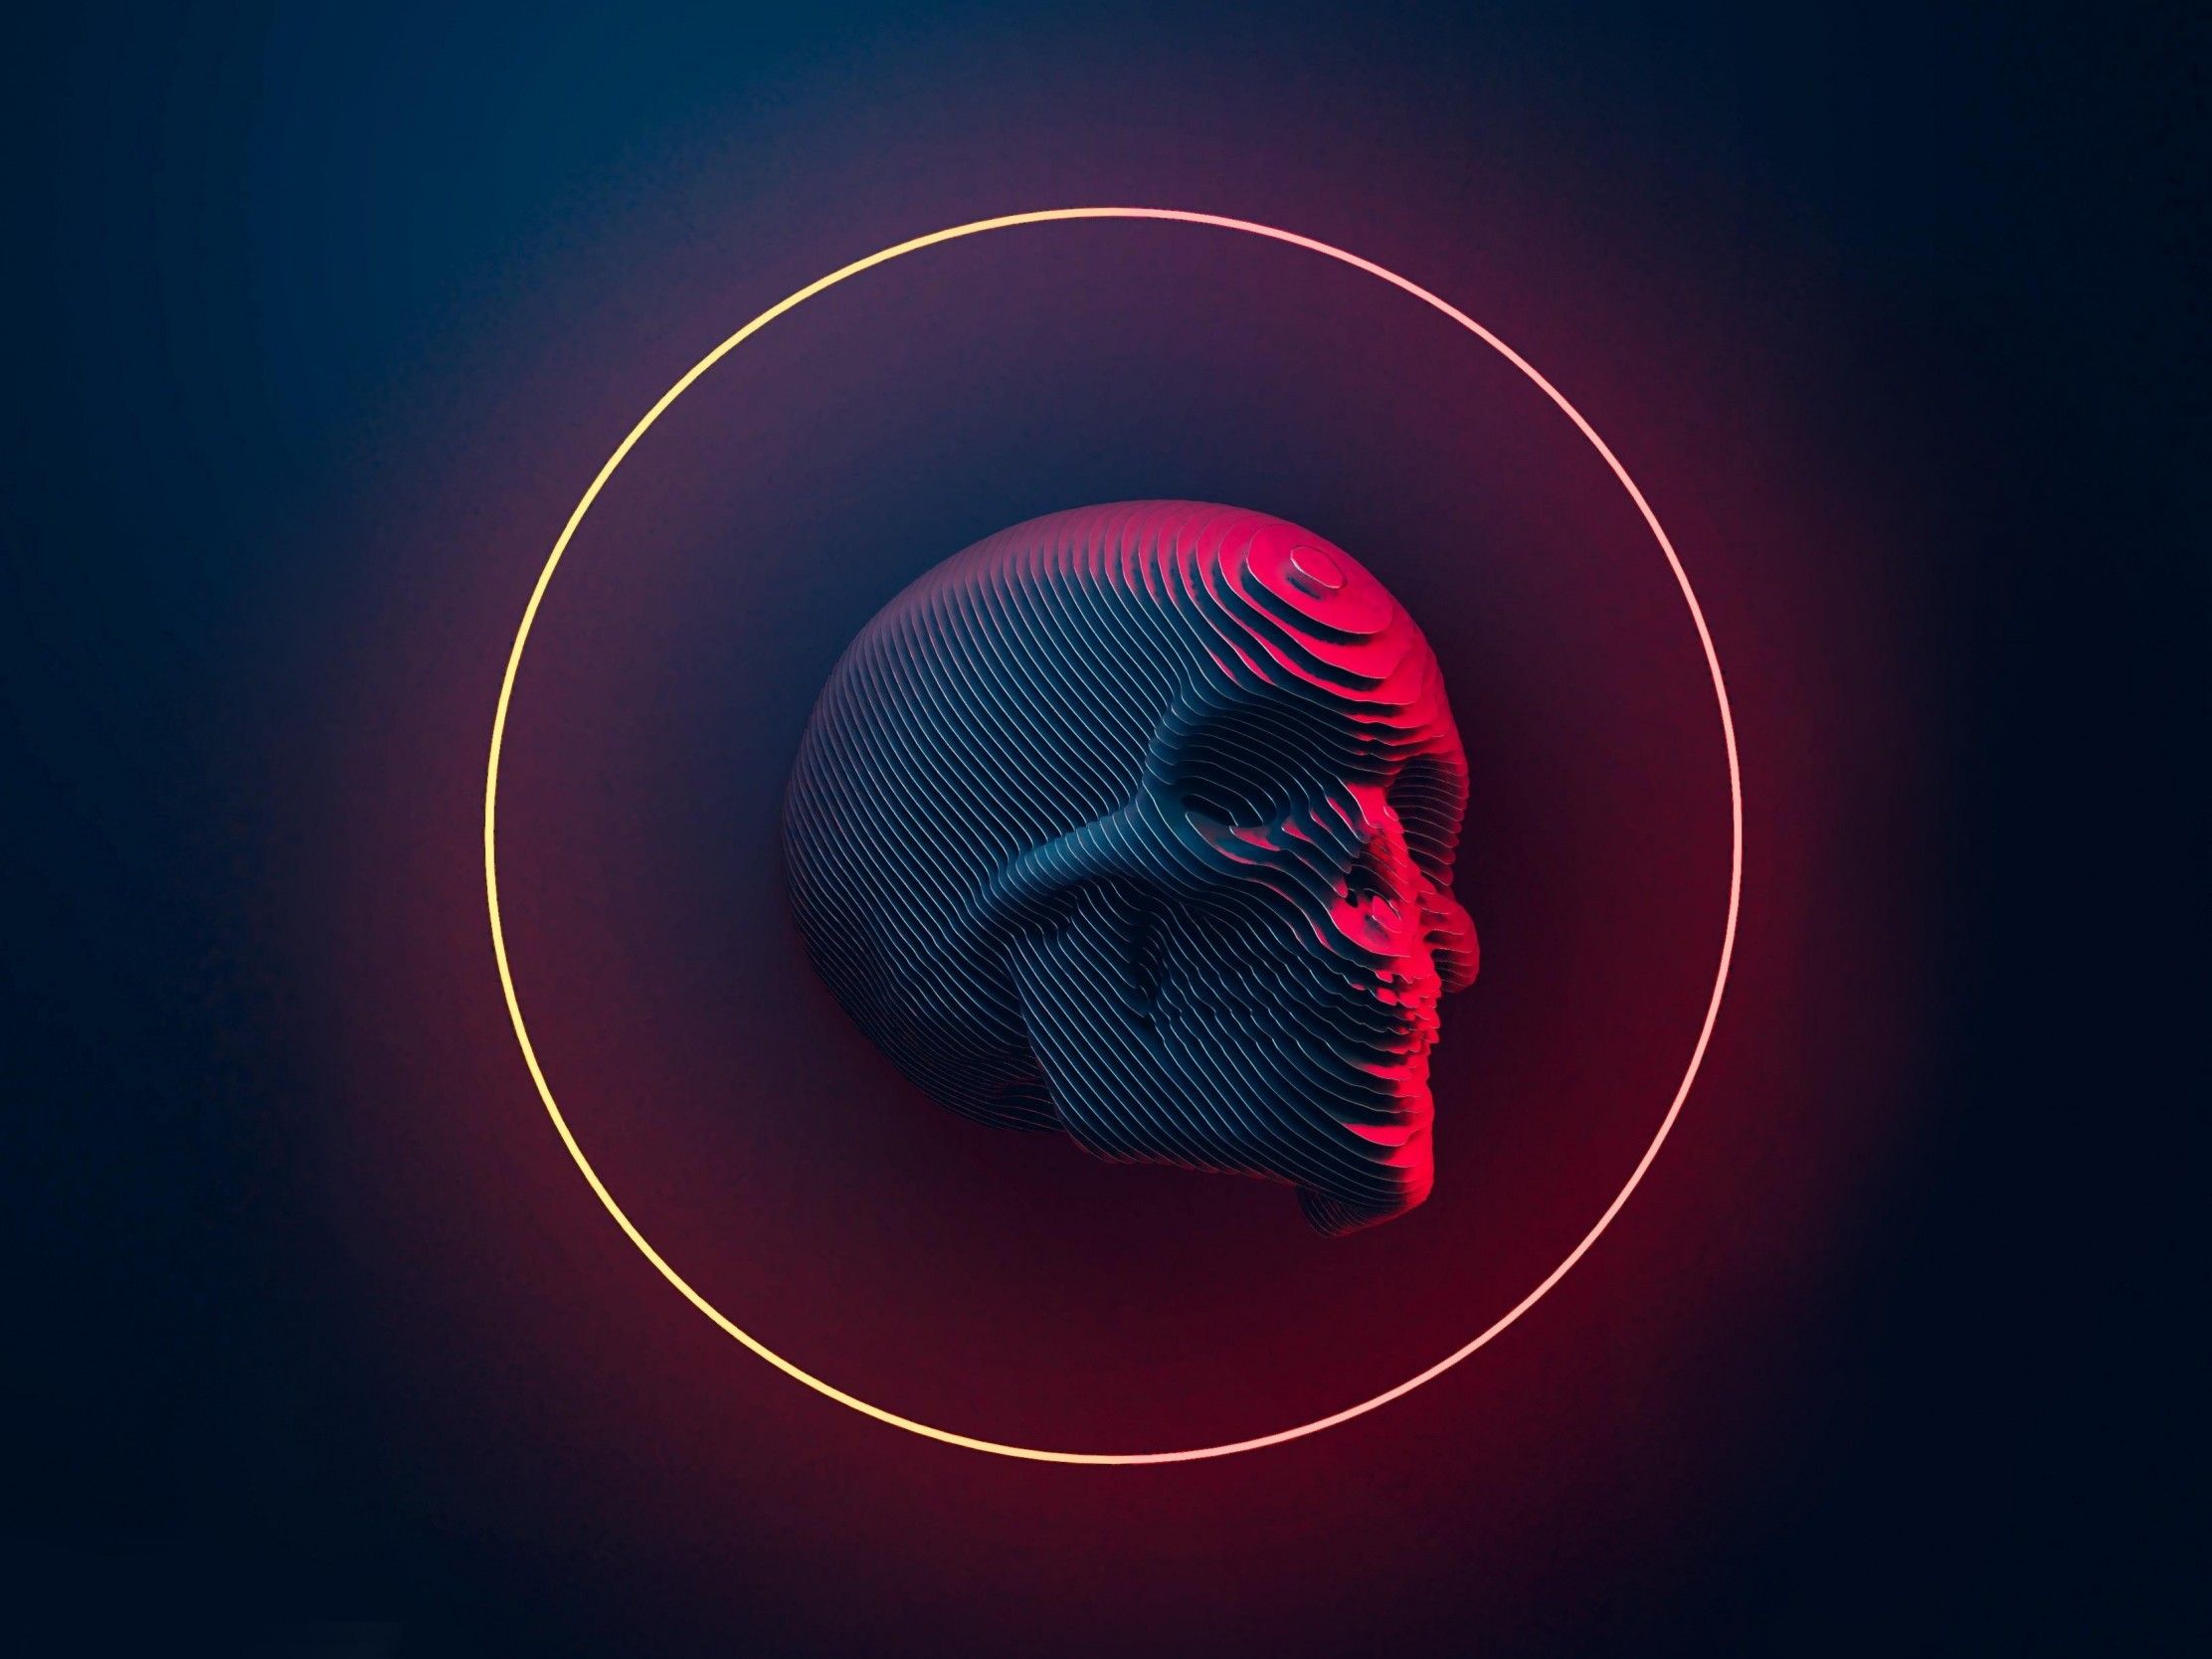 Just Another Skull 4K Wallpapers iPad Pro